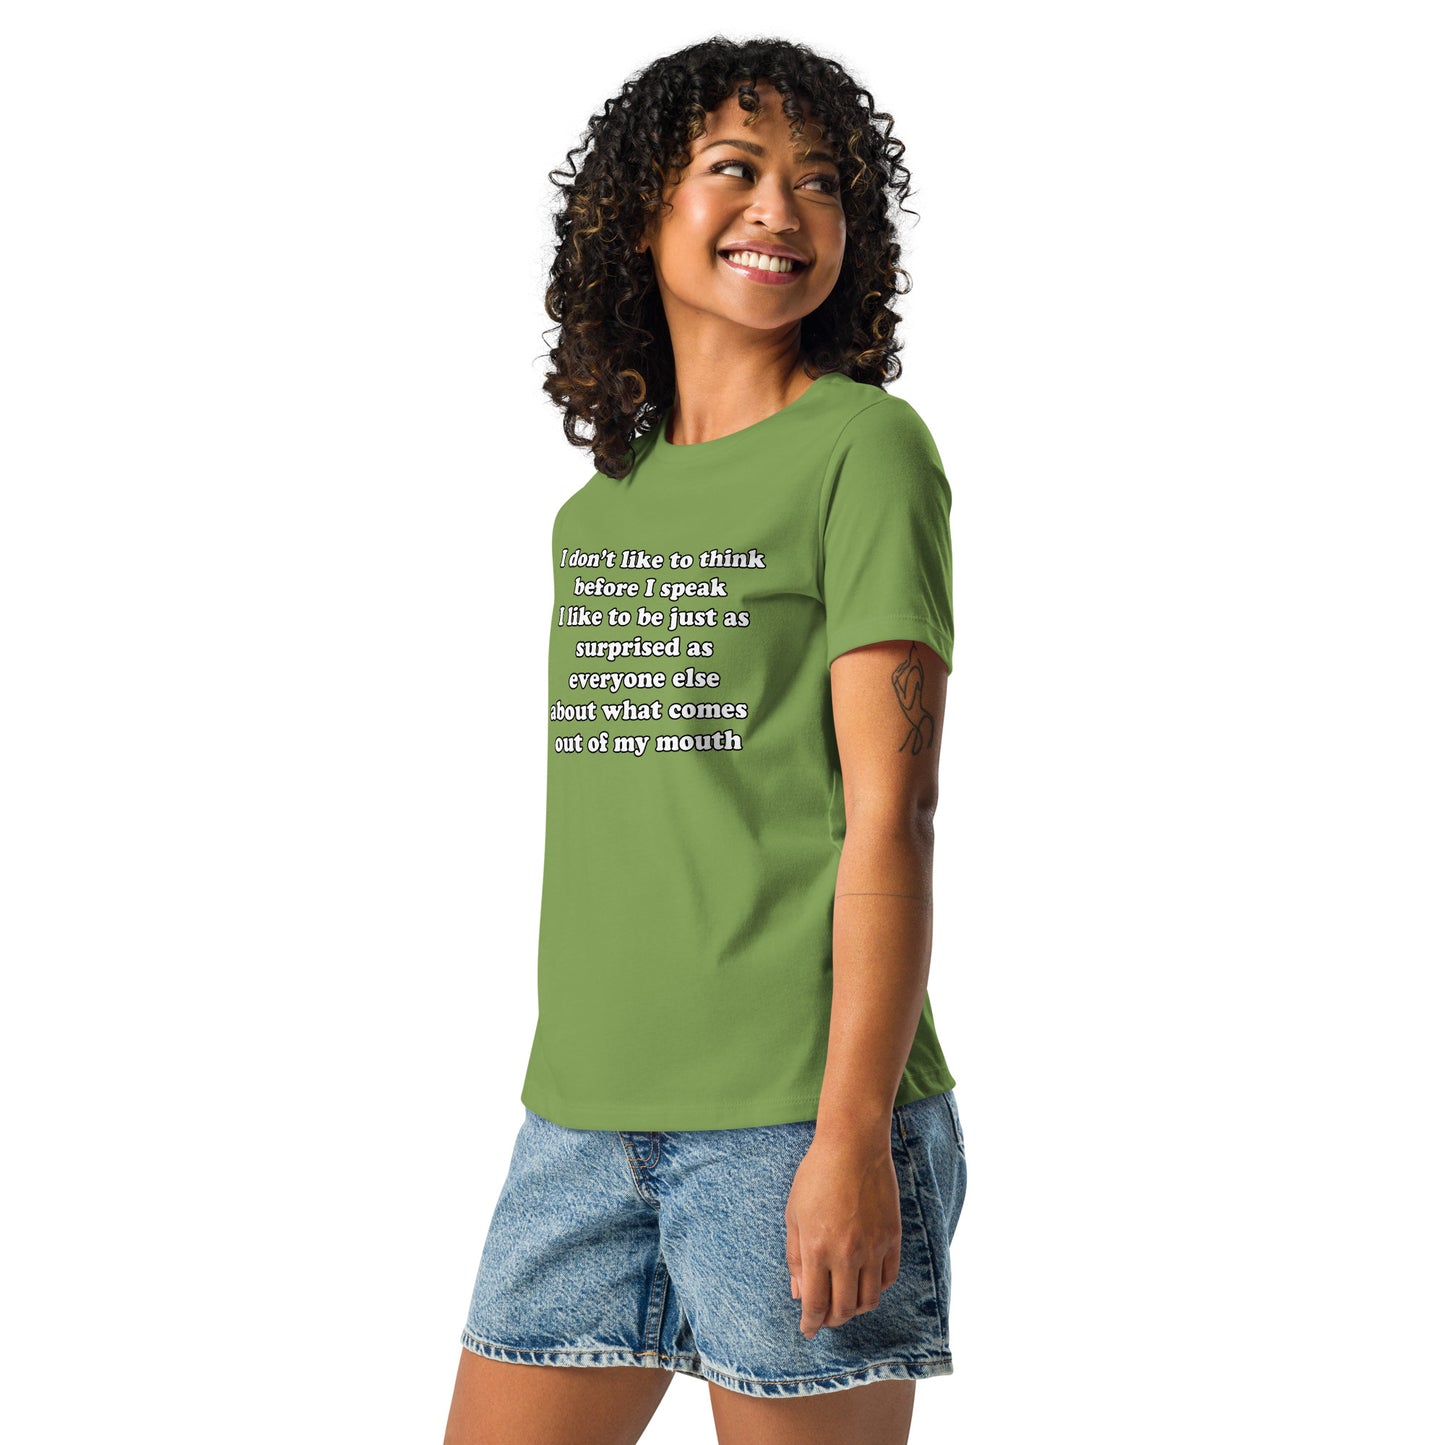 Woman with leaf green t-shirt with text “I don't think before I speak Just as serprised as everyone about what comes out of my mouth"